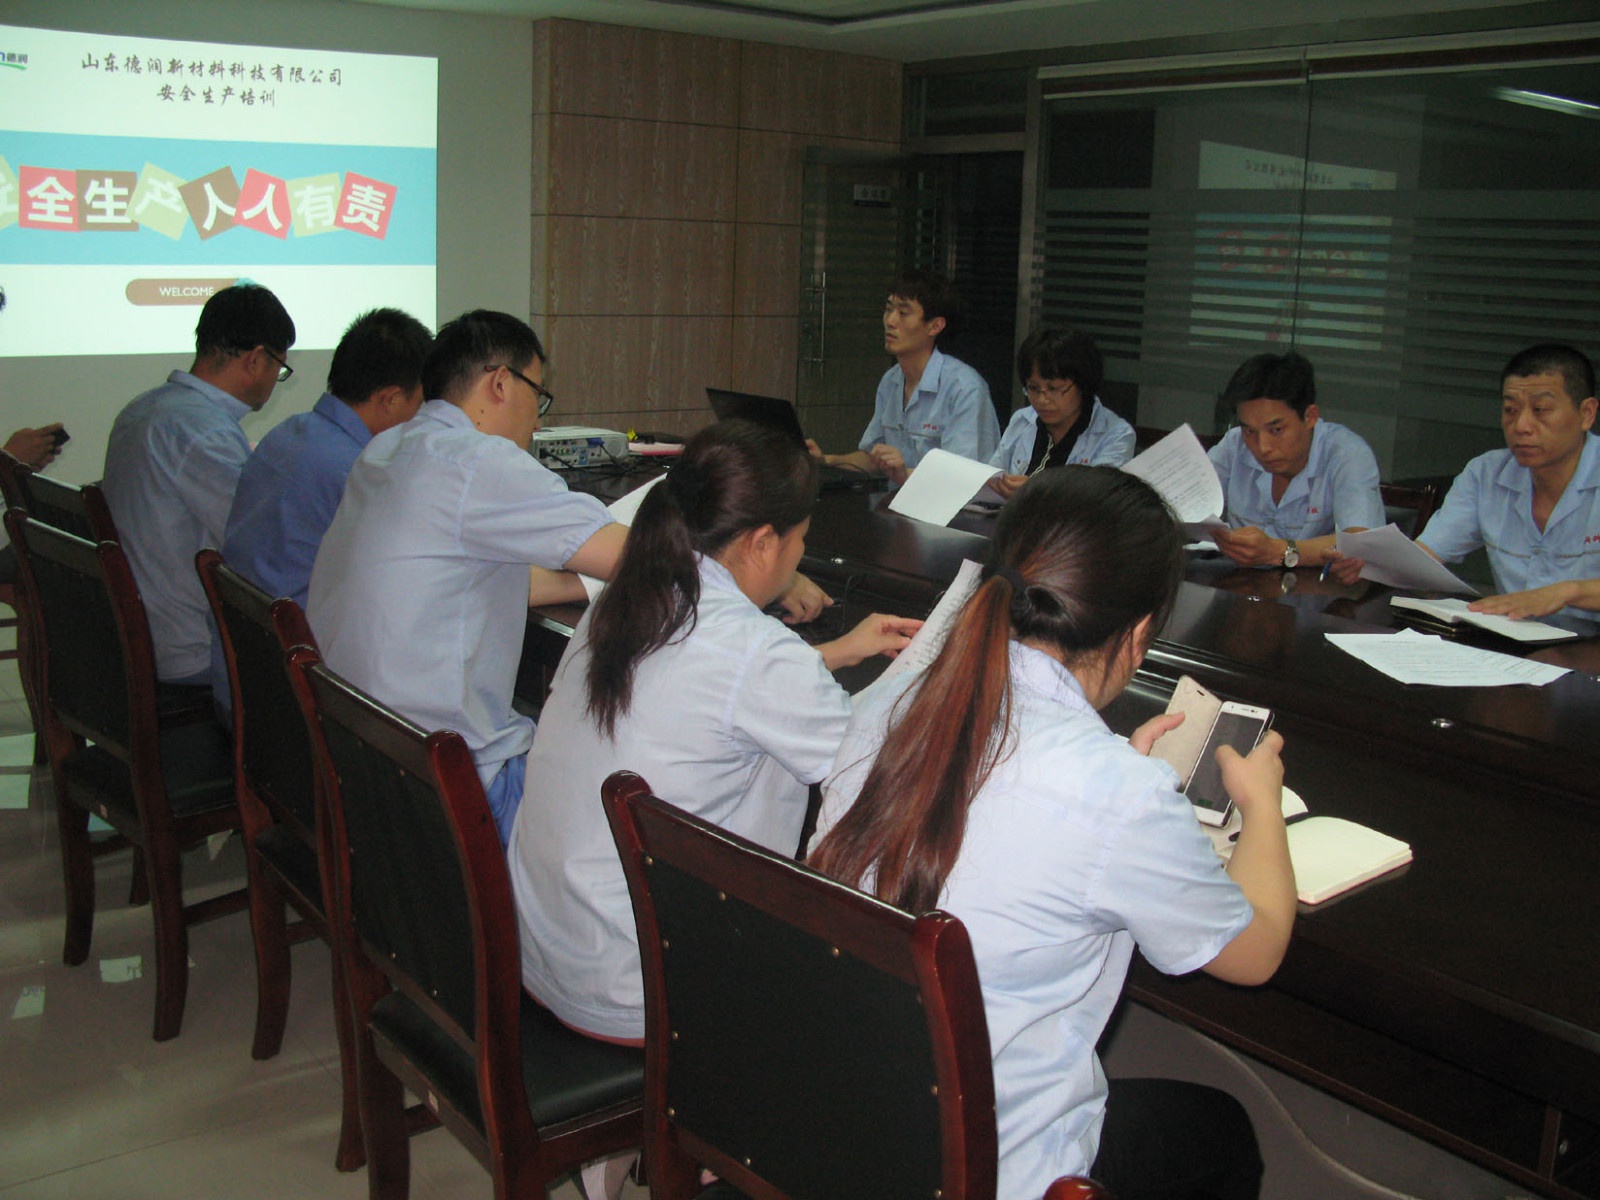 The company held a special meeting on safety training!